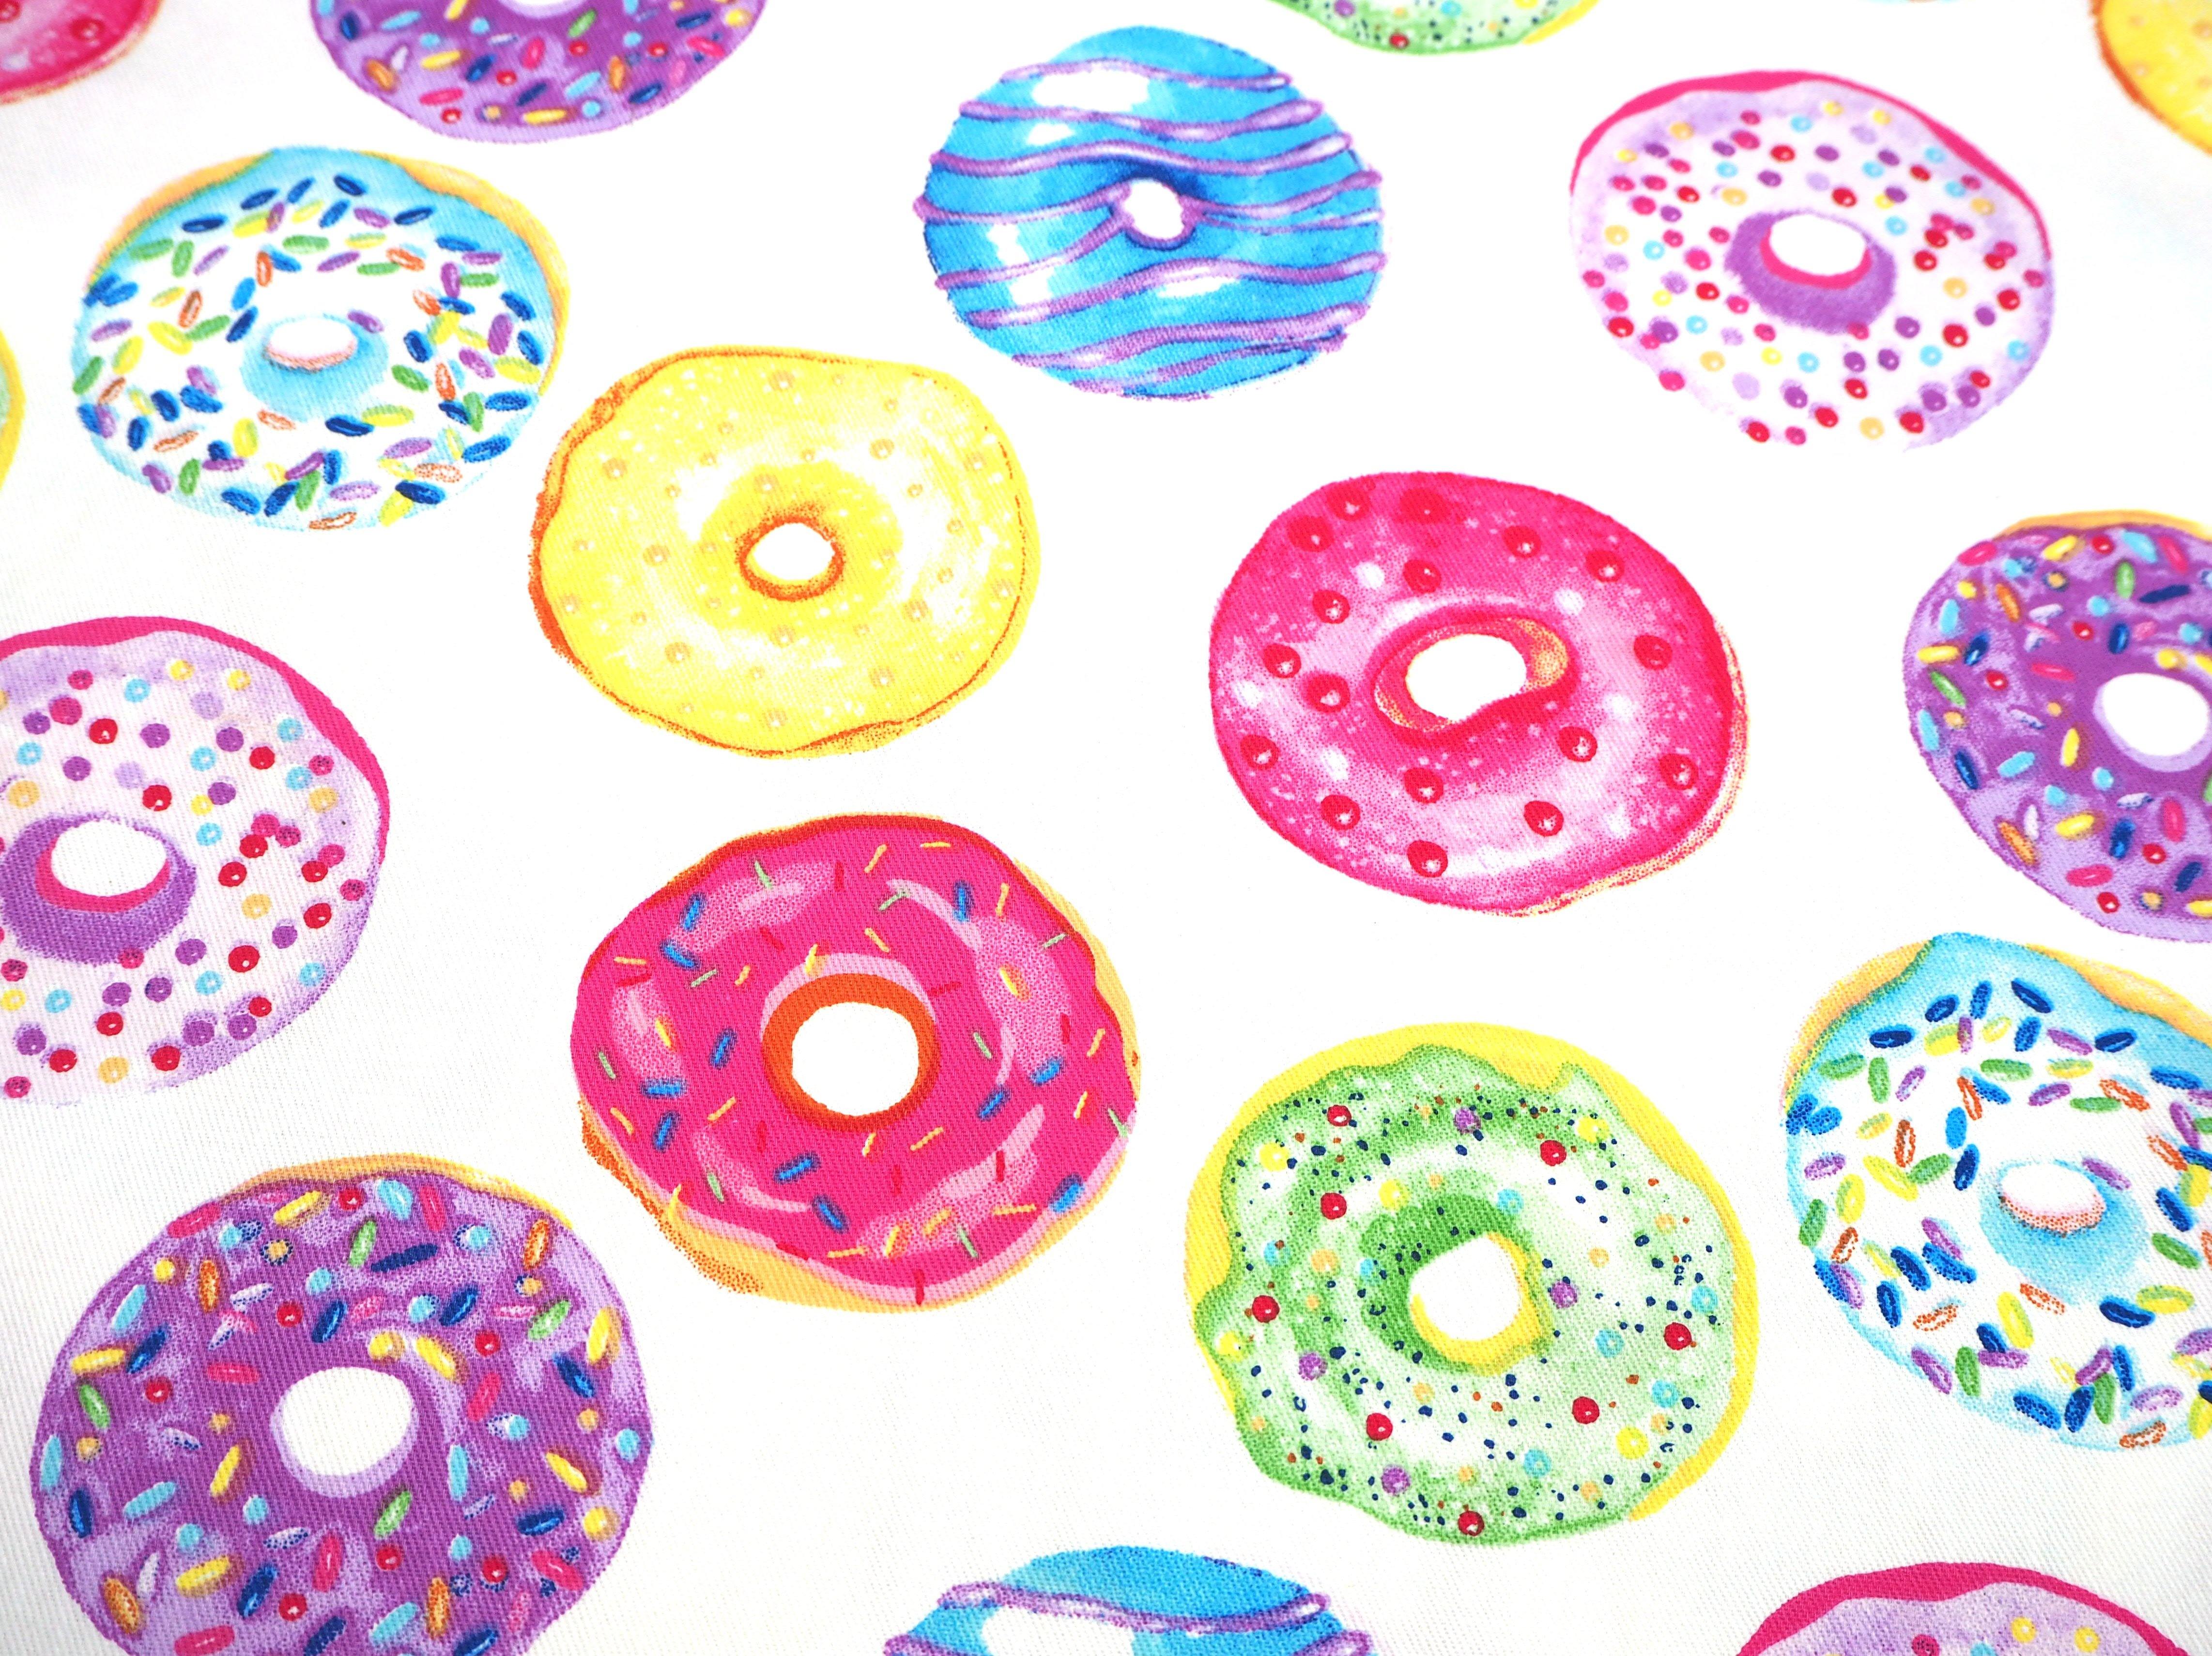 Delicious Colorful Donut images on White background, 100% cotton fabric